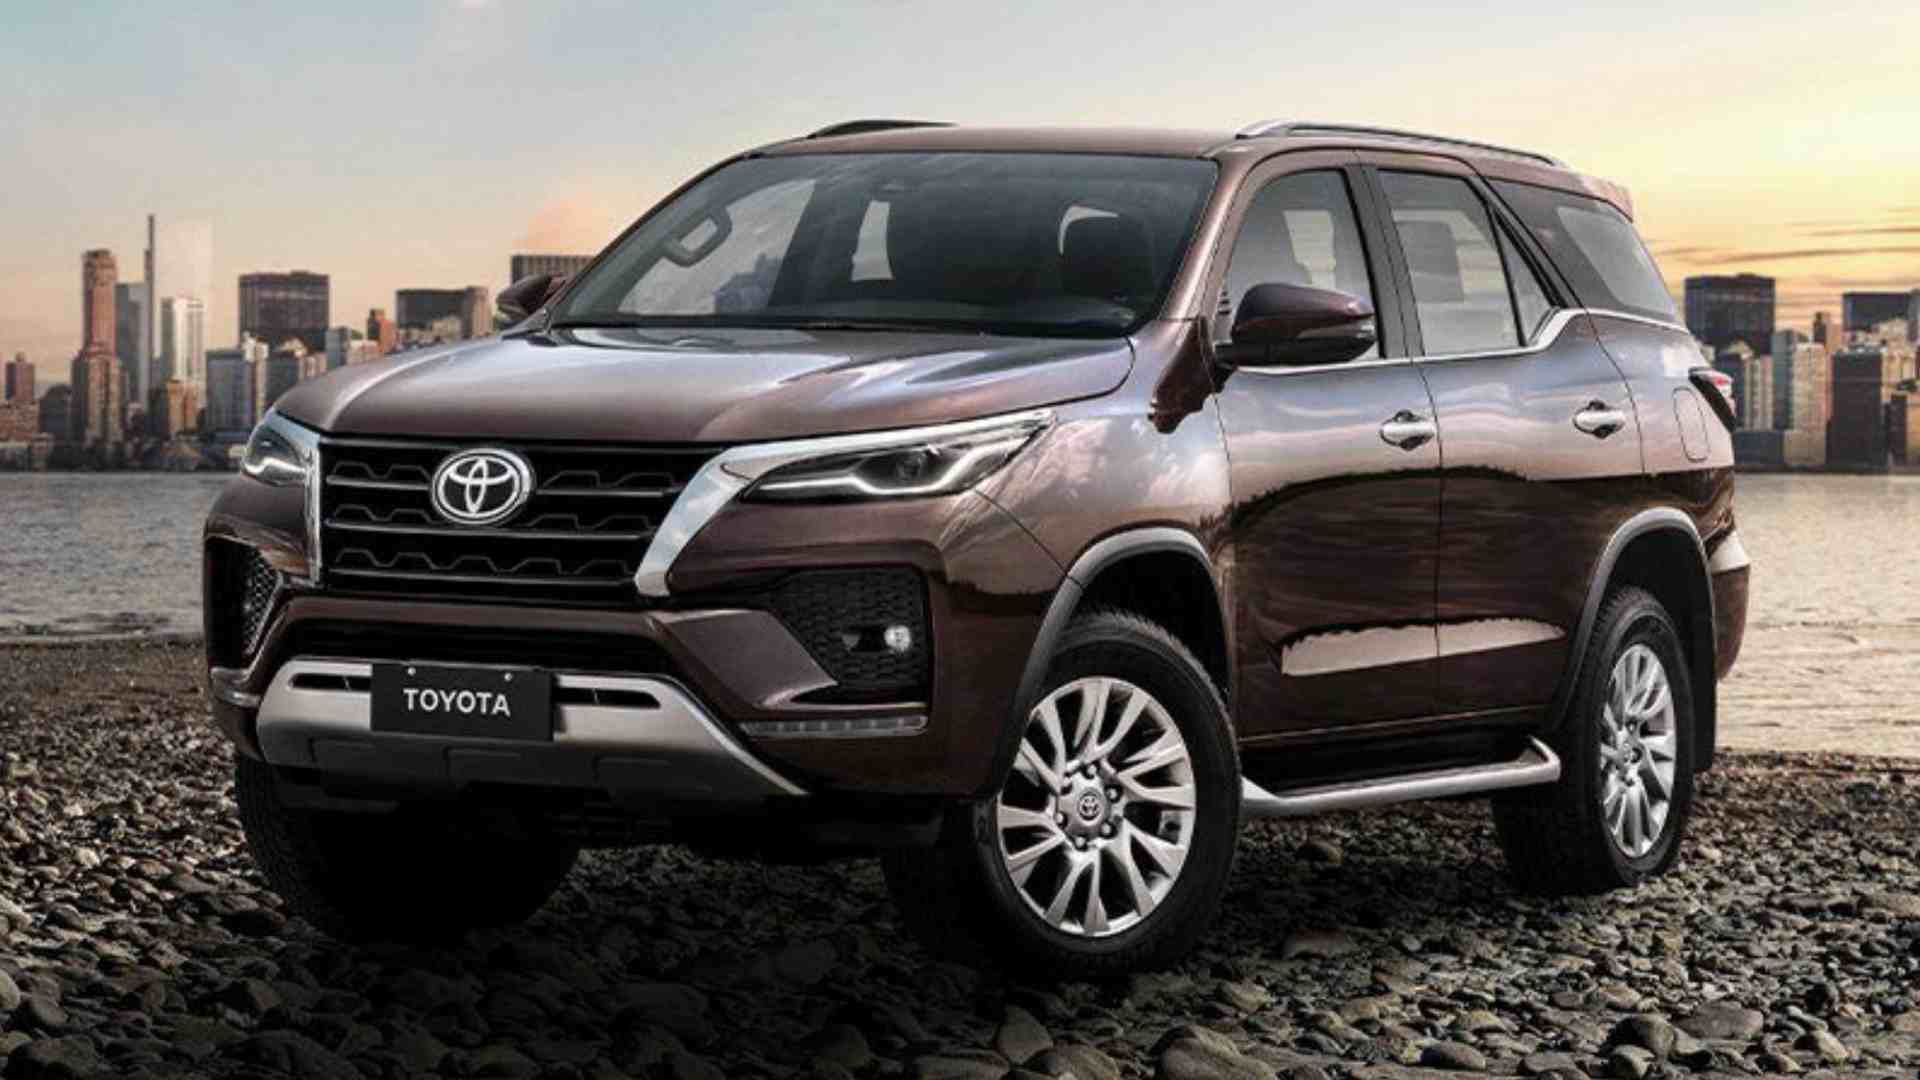 Toyota Brazil Introduces Innovative Payment Option for Toyota Fortuner, Hilux Buyers - Technology News, Firstpost